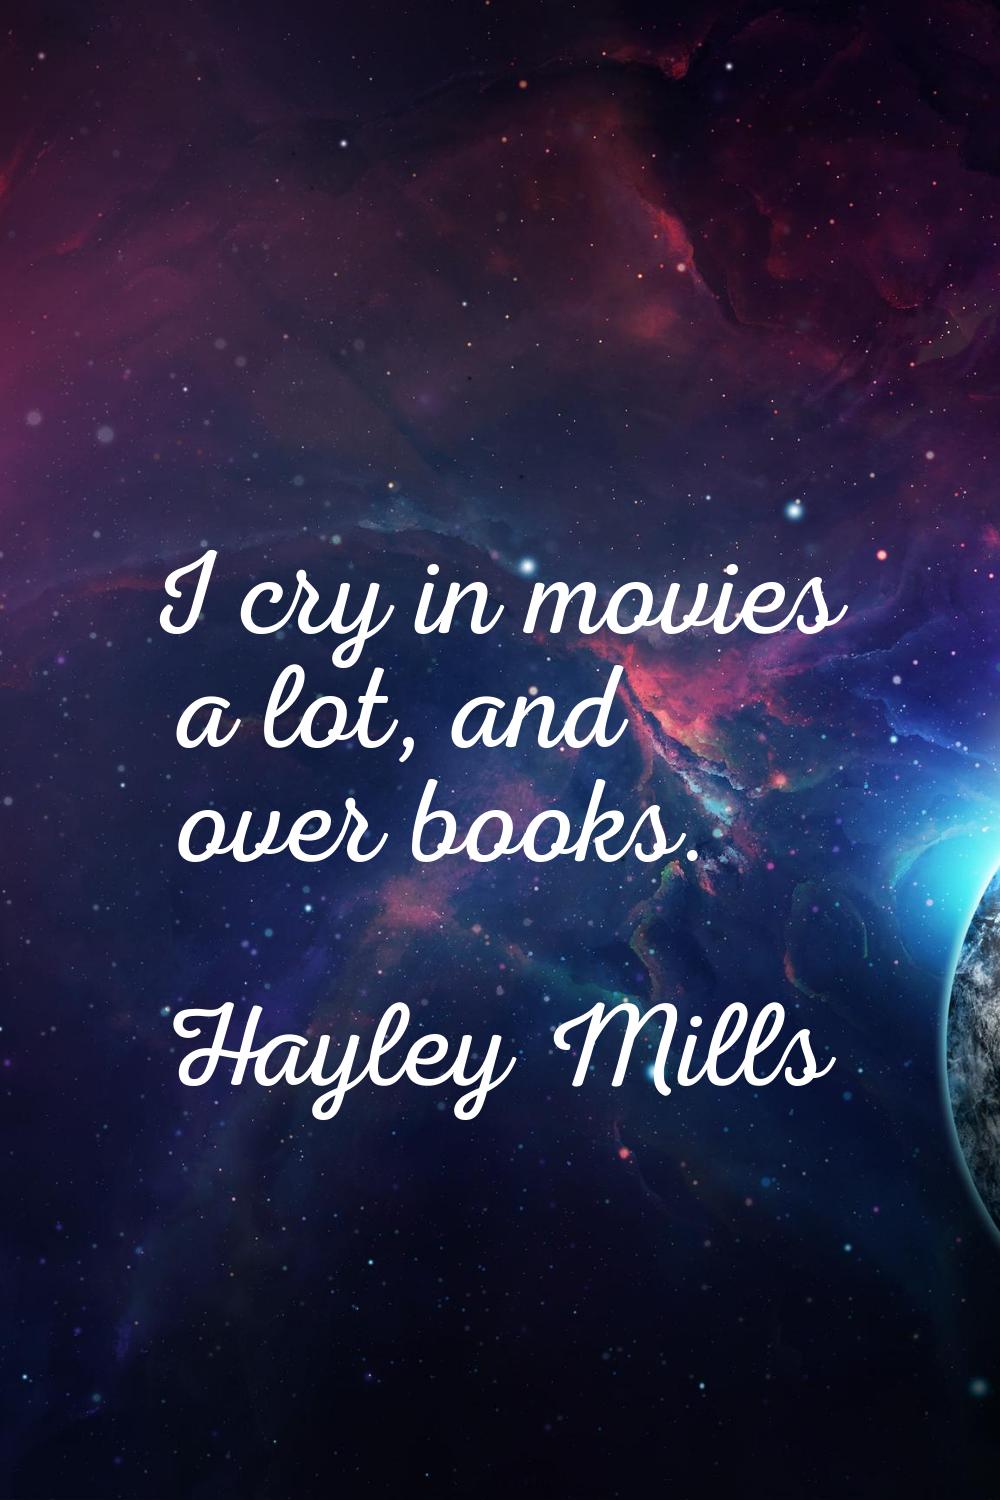 I cry in movies a lot, and over books.